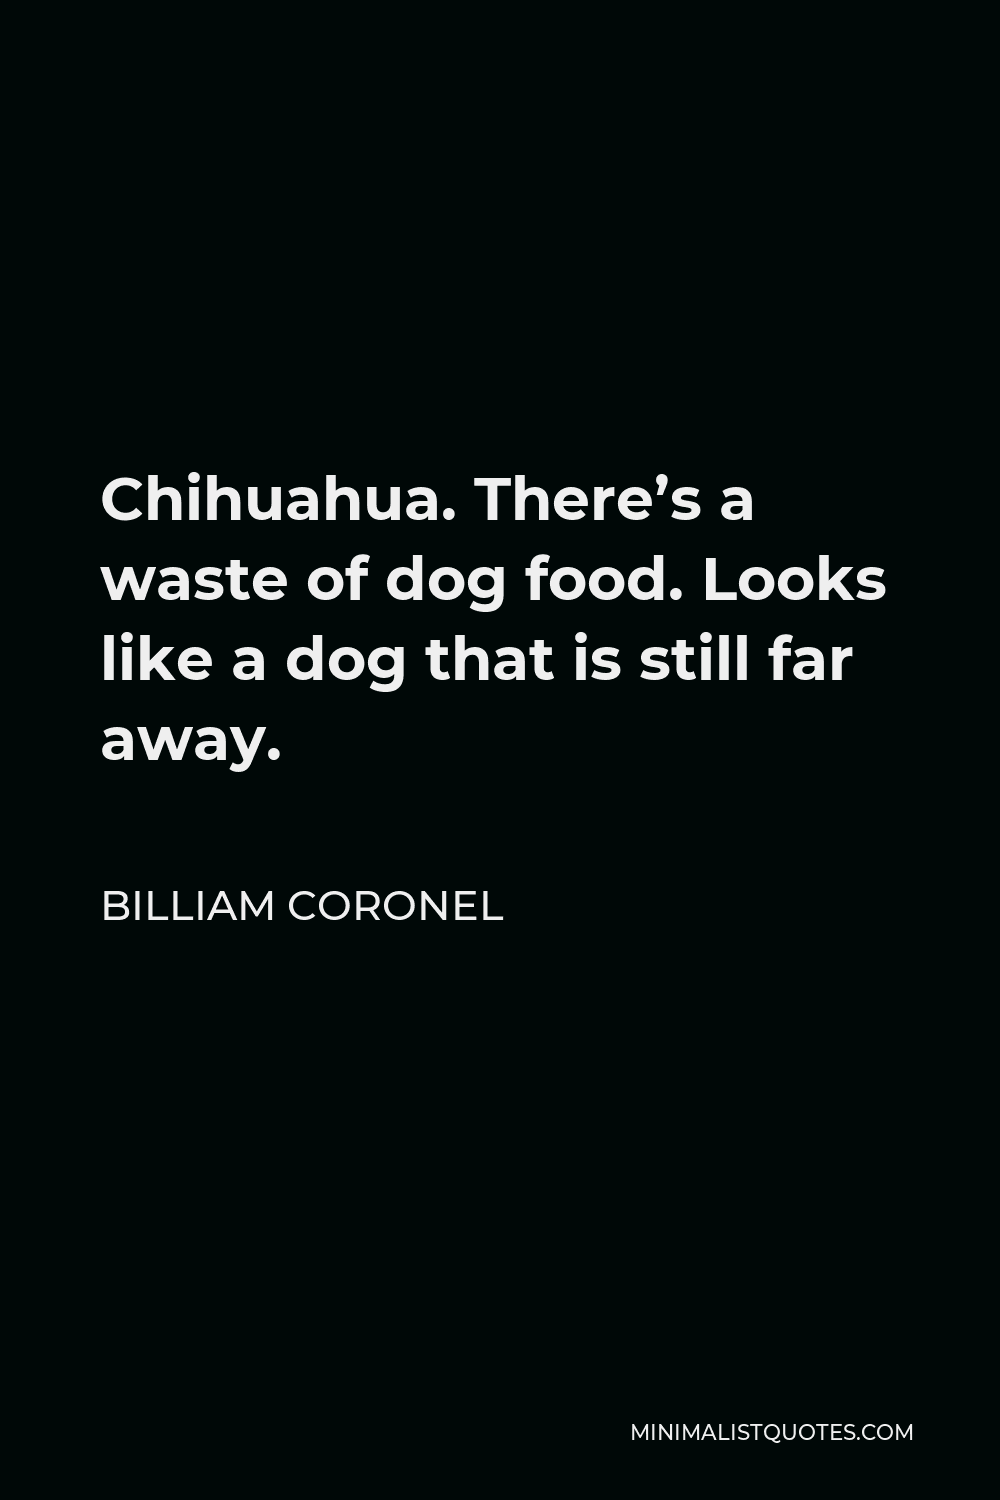 Billiam Coronel Quote - Chihuahua. There’s a waste of dog food. Looks like a dog that is still far away.